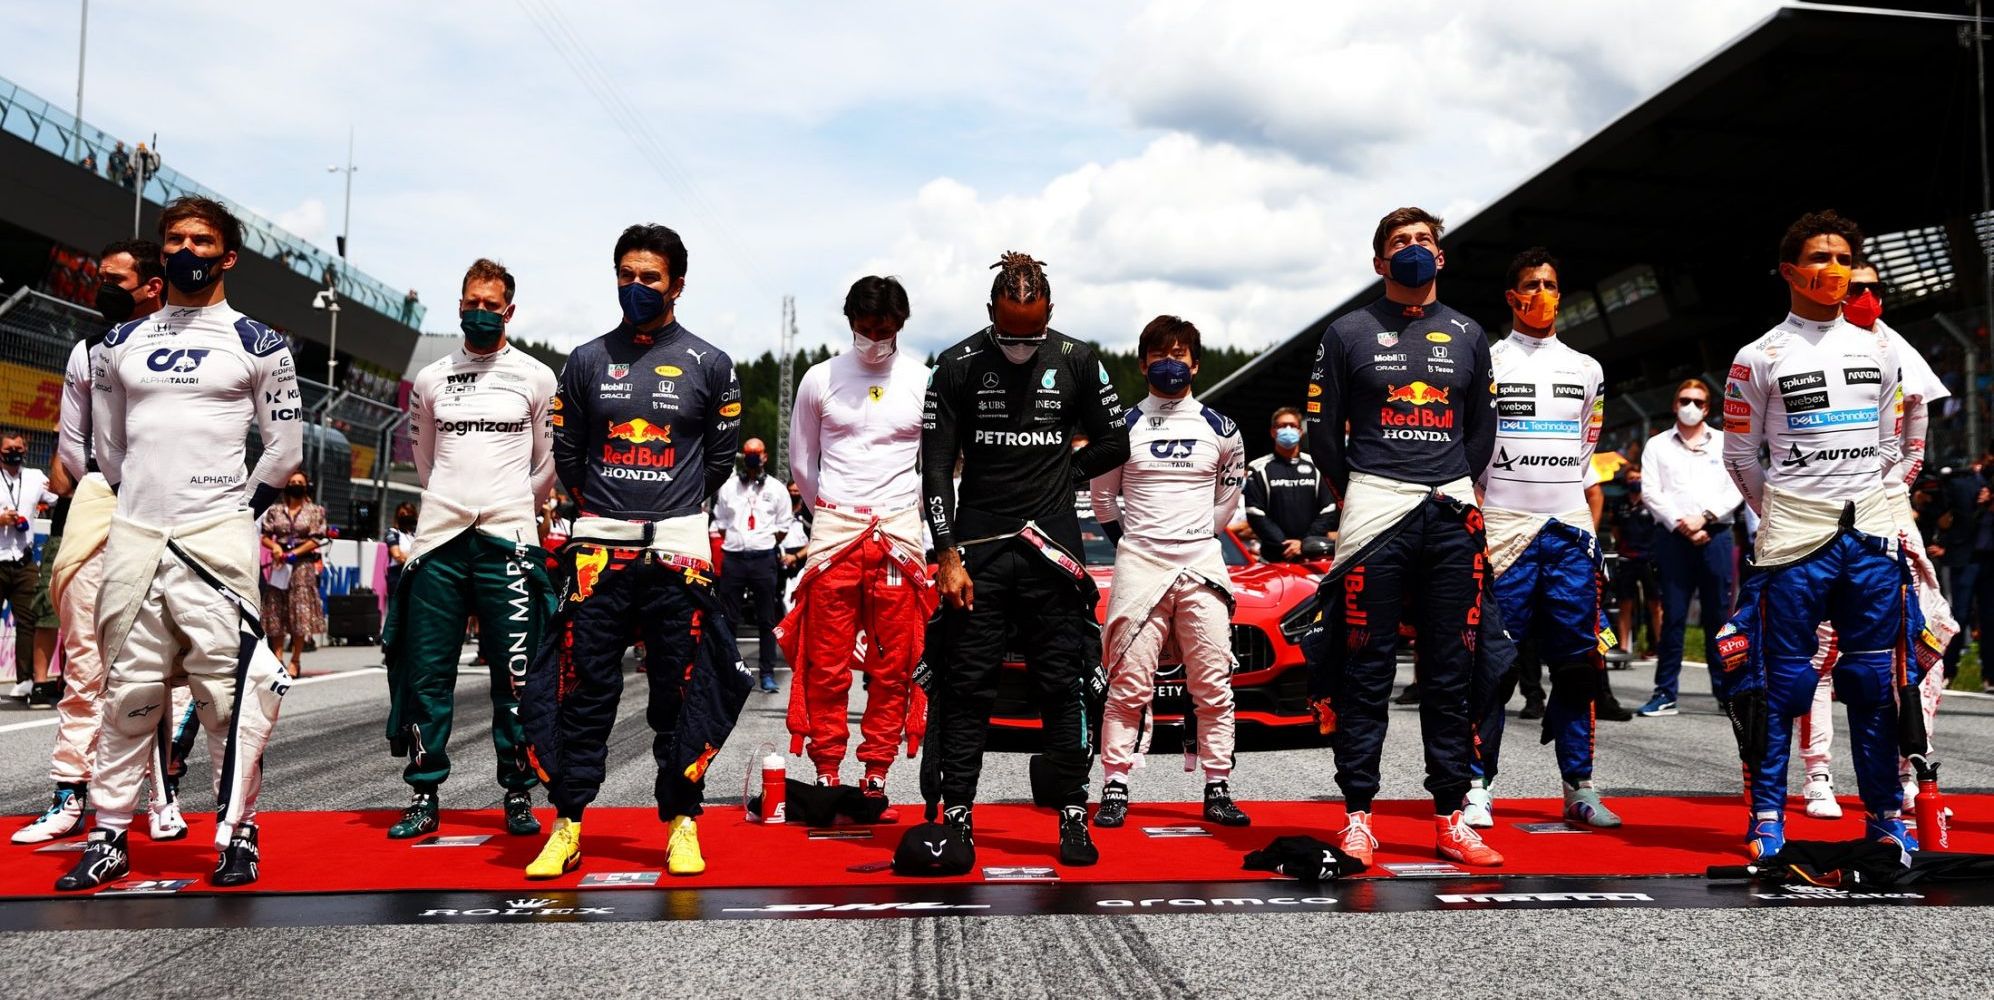 F1 Drivers Now Need Permission to Make 'Political' or 'Religious' Statements